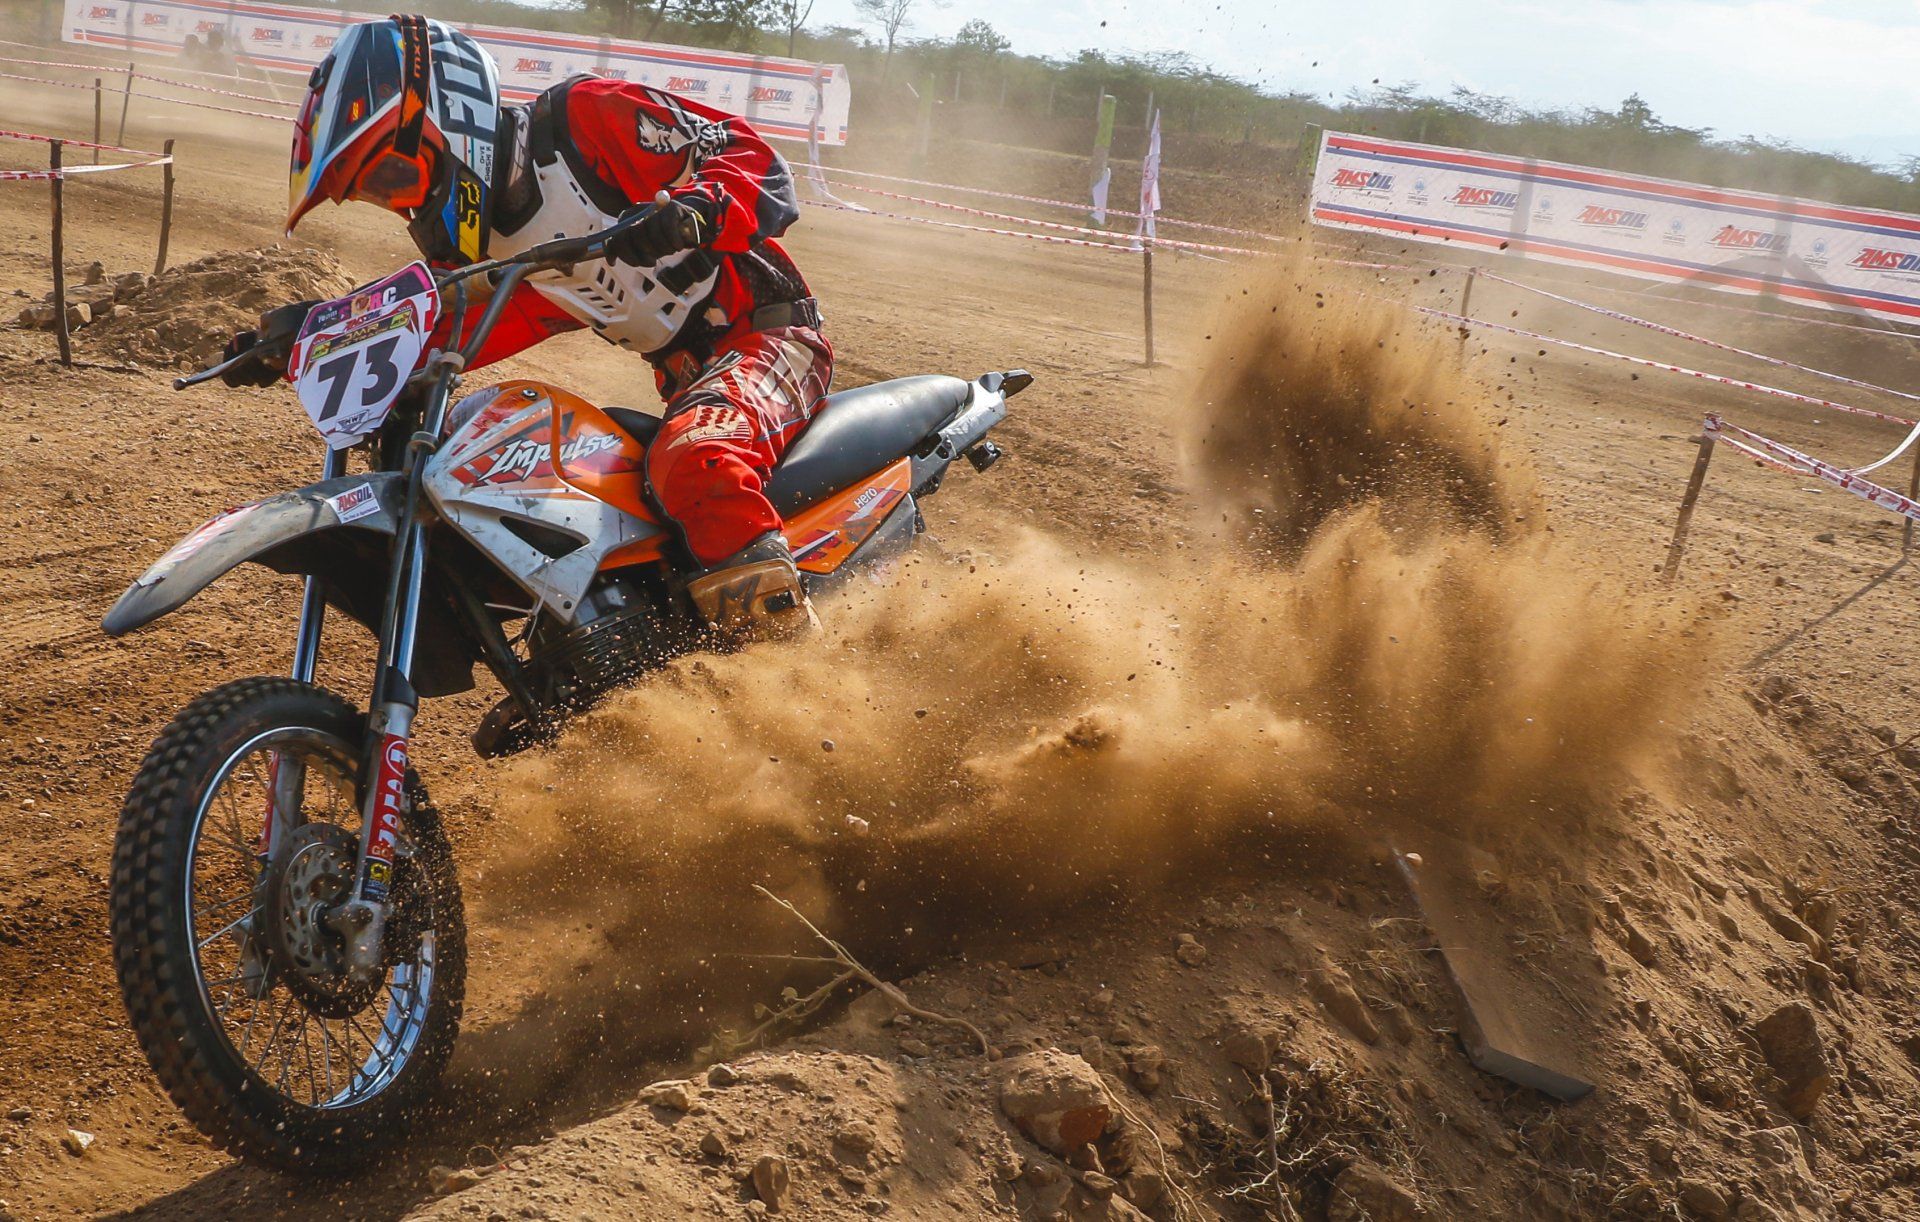 Competitive Dirt Bike Racer going through the course